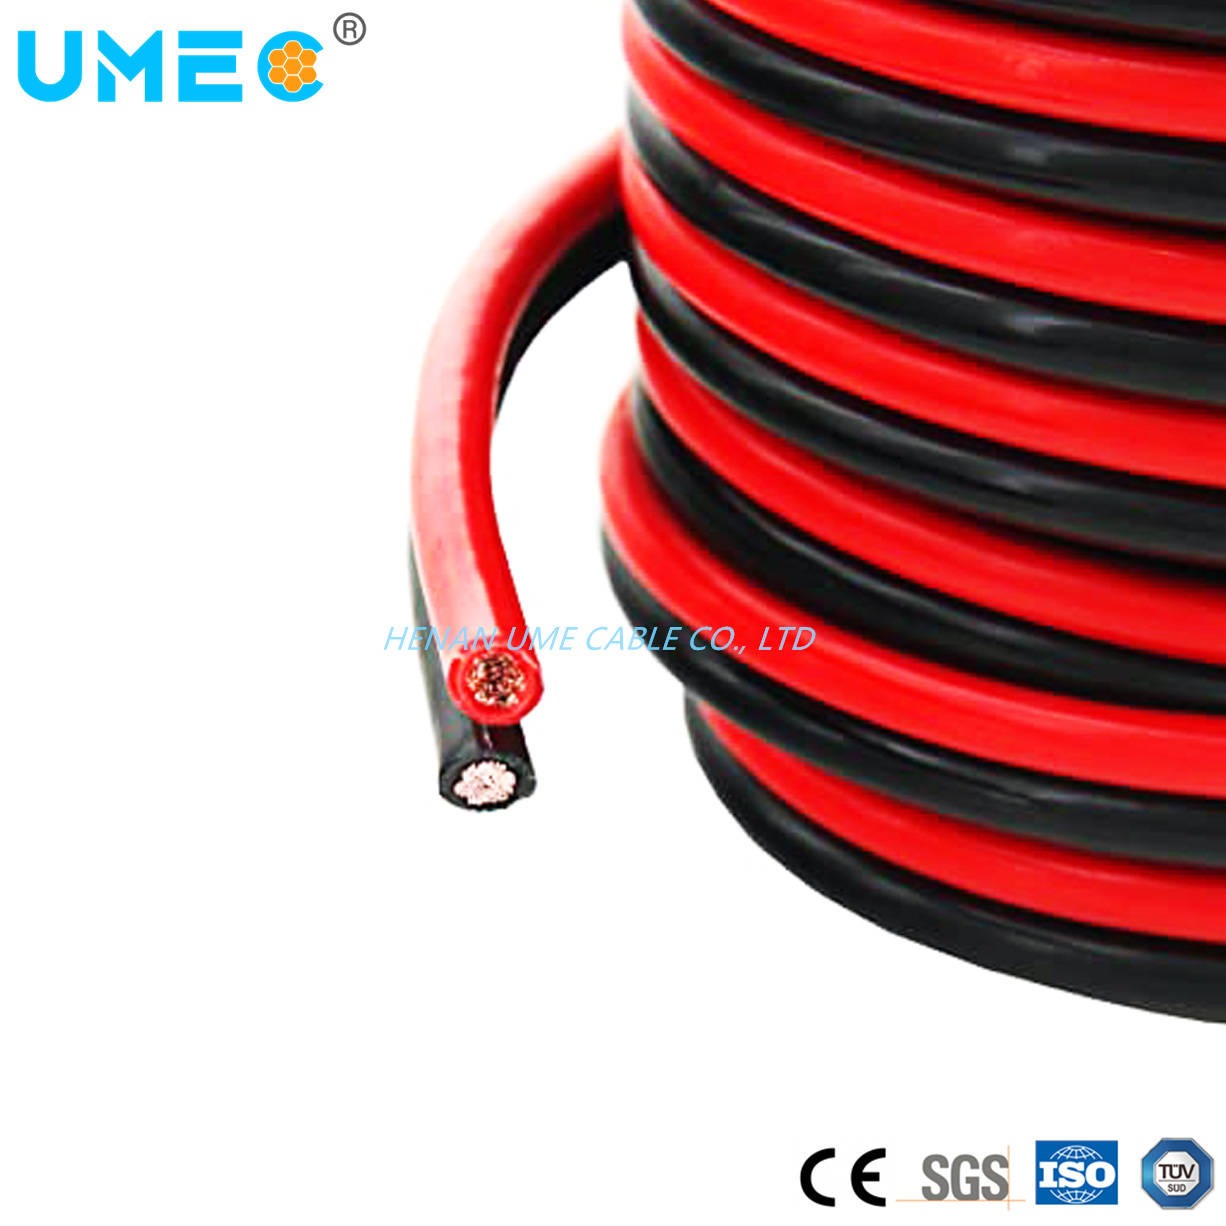 Yh Yhf Electric Welding Machine Cable